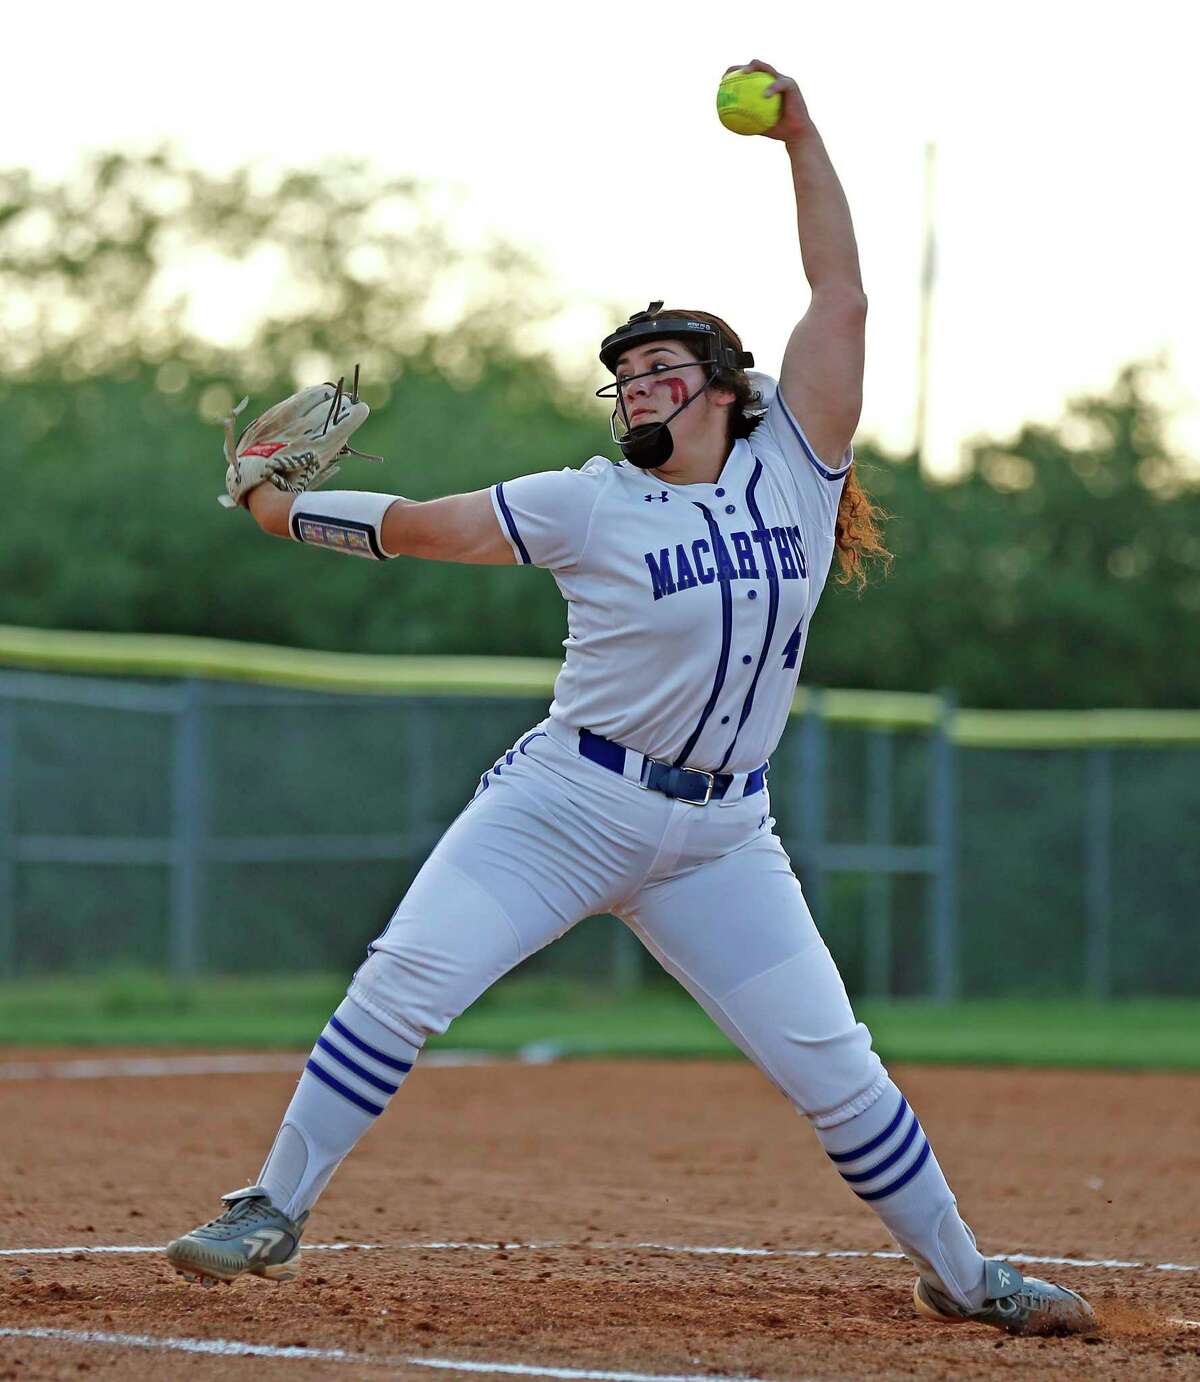 MacArthur pitcher Madison Collins (4) delivers a pitch in a HS Softball Playoffs game where MacArthur defeated Clemens 11-1 on Wednesday, April 27, 2022 at Blossom Athletic Field.